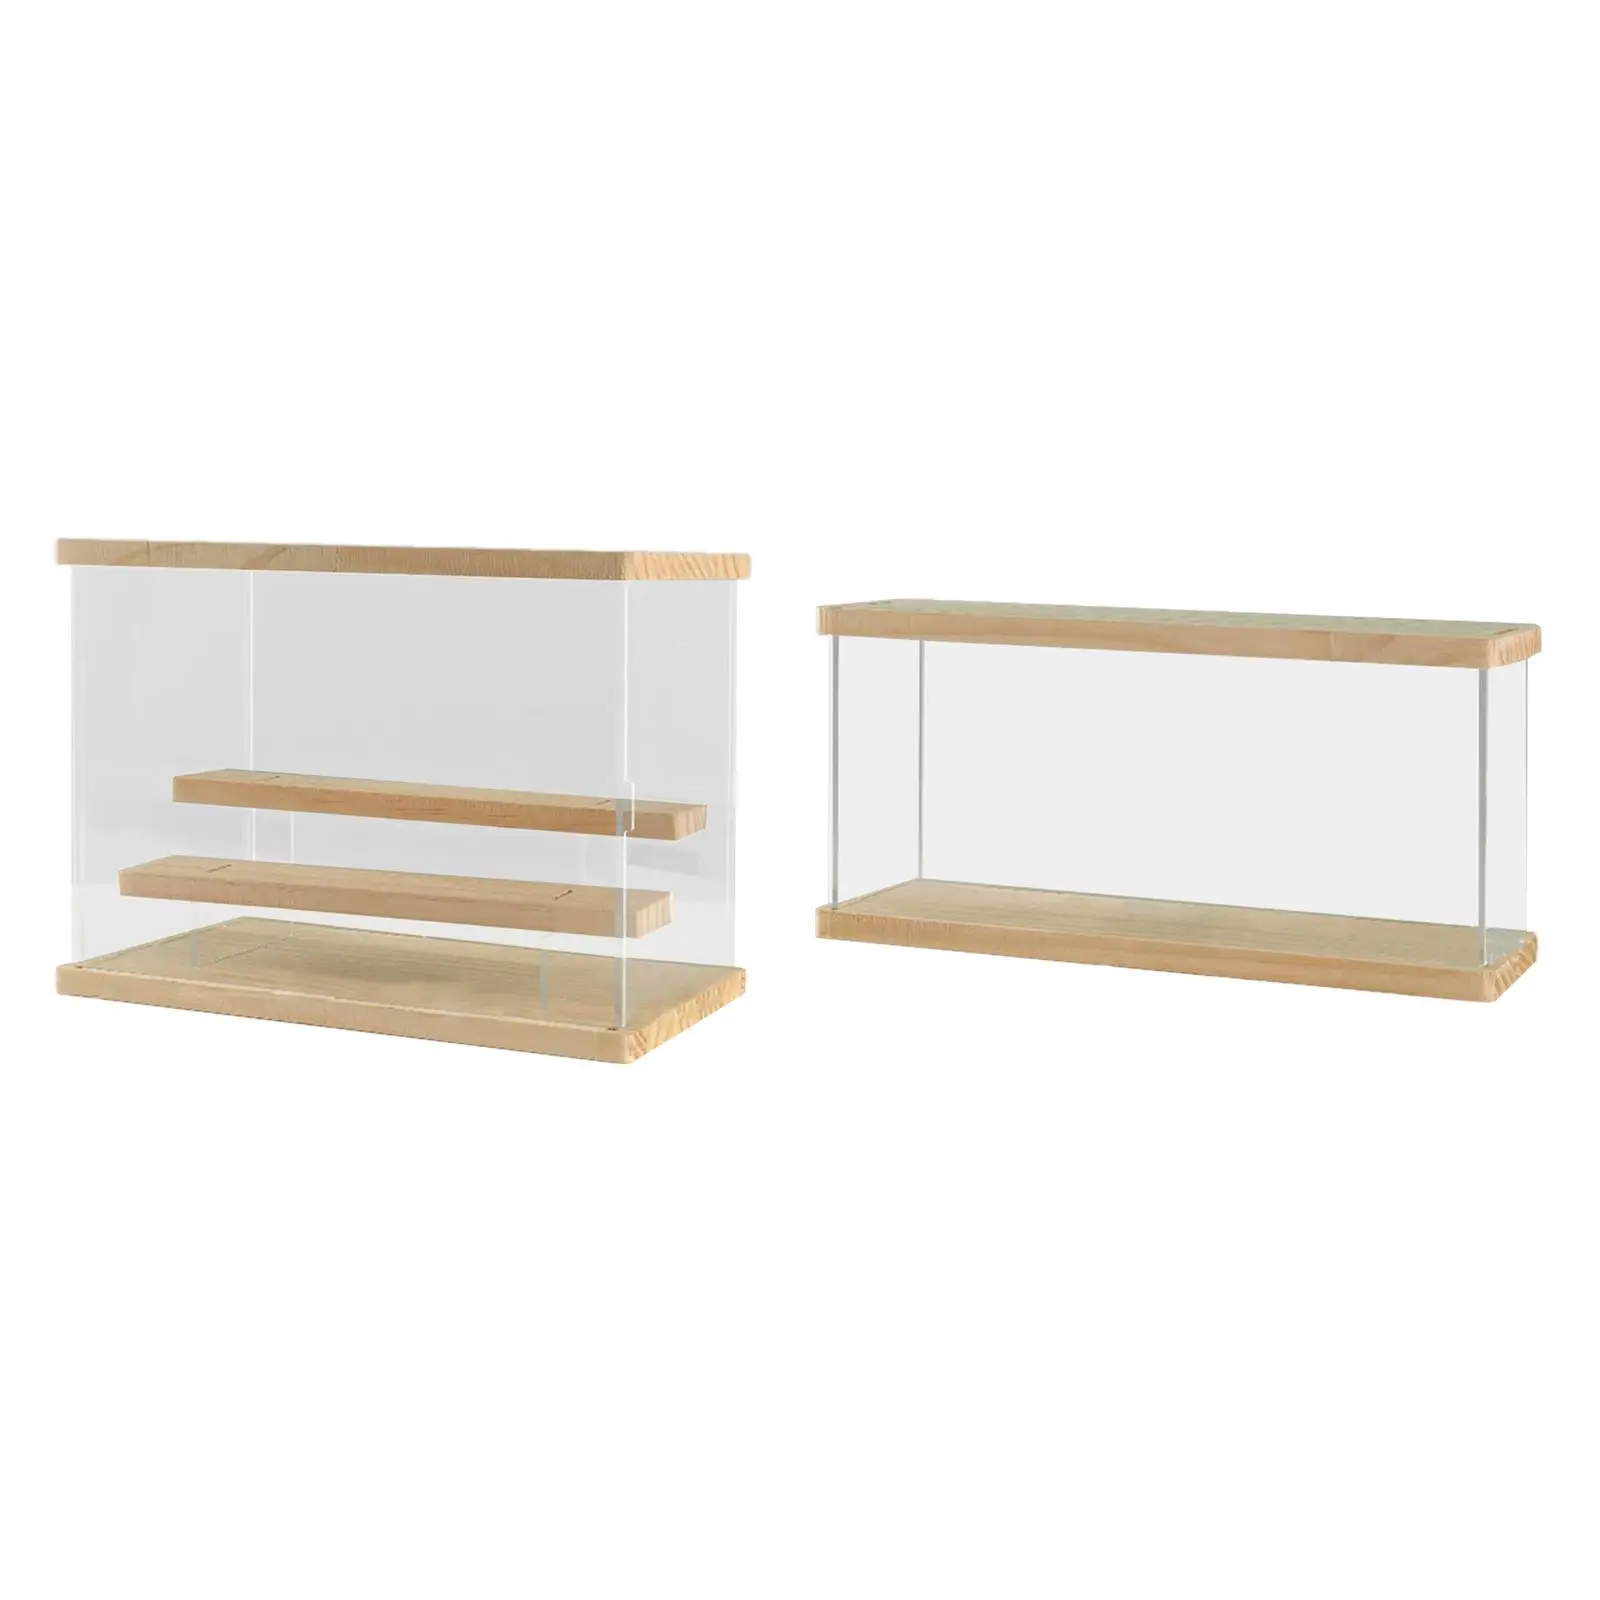 Acrylic Display Case Dustproof Showcase for Countertop Collectibles Toys